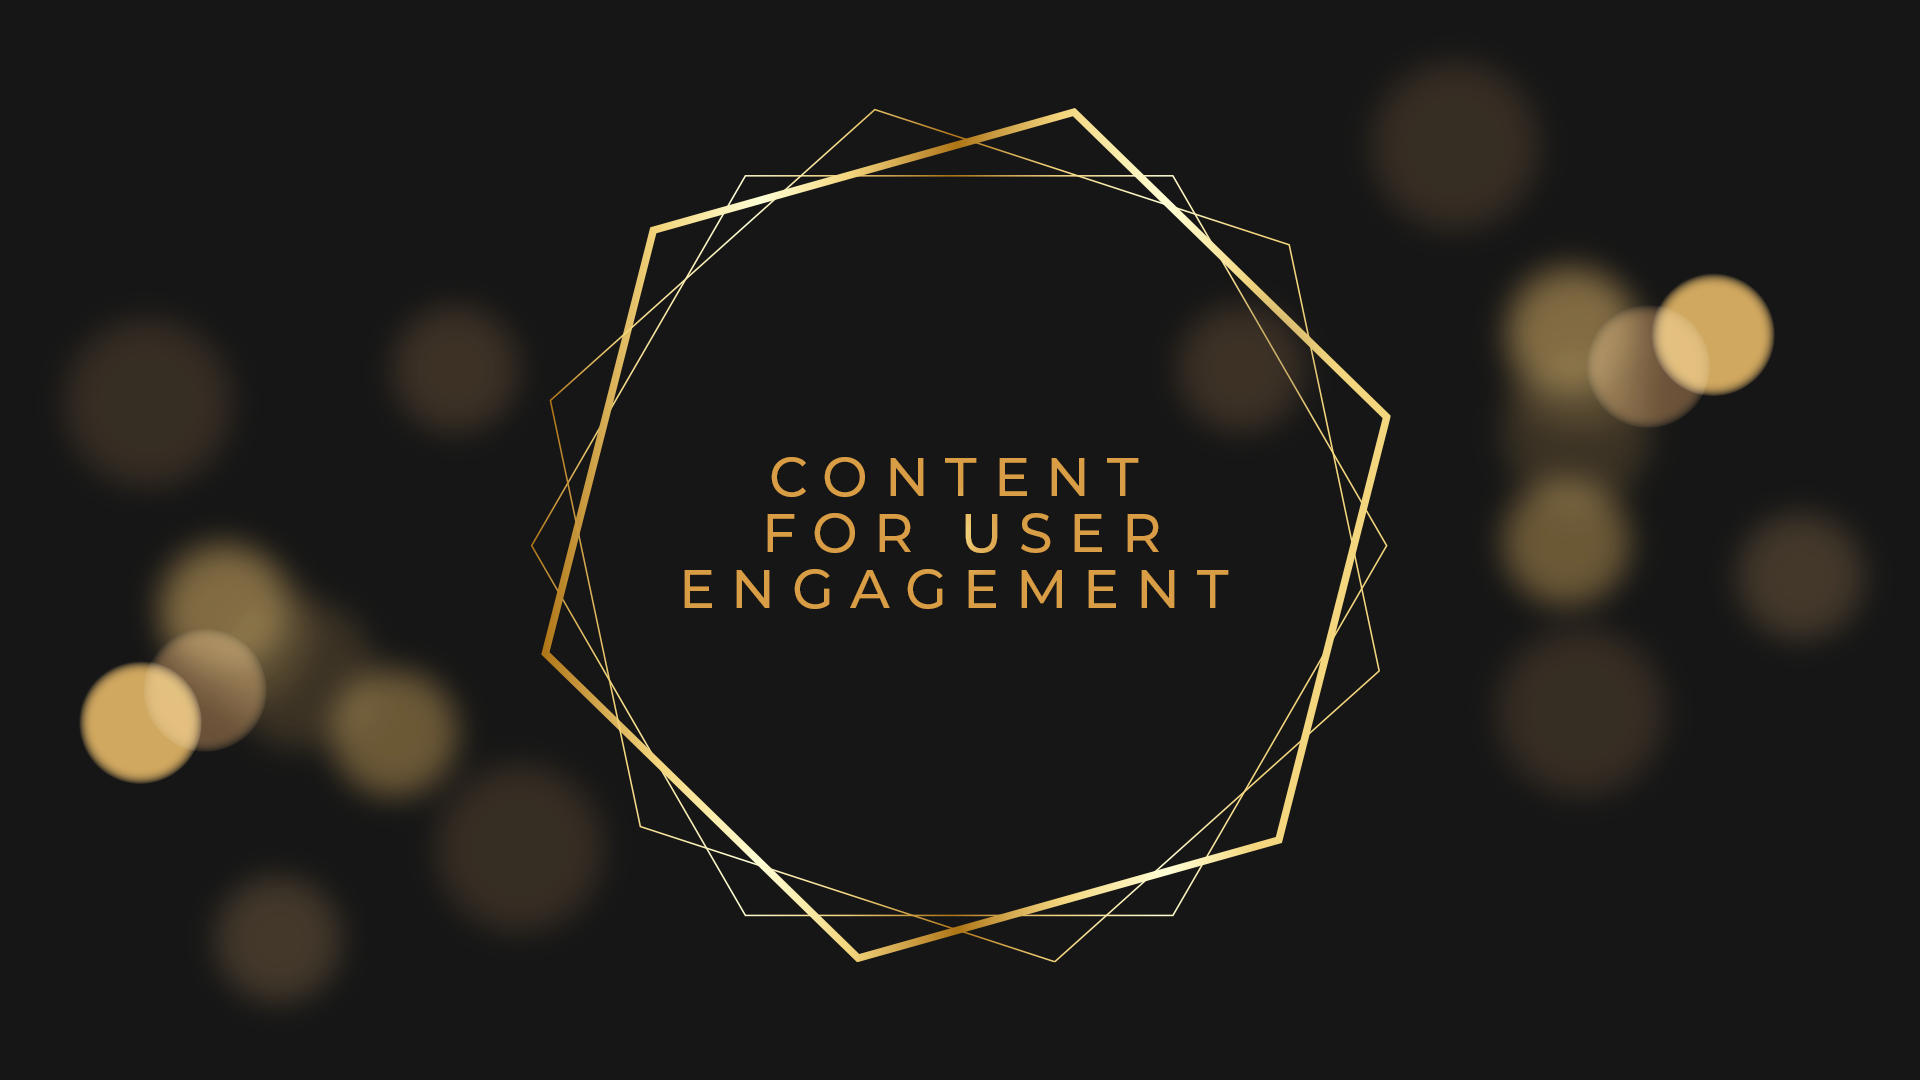 Content for User Engagement